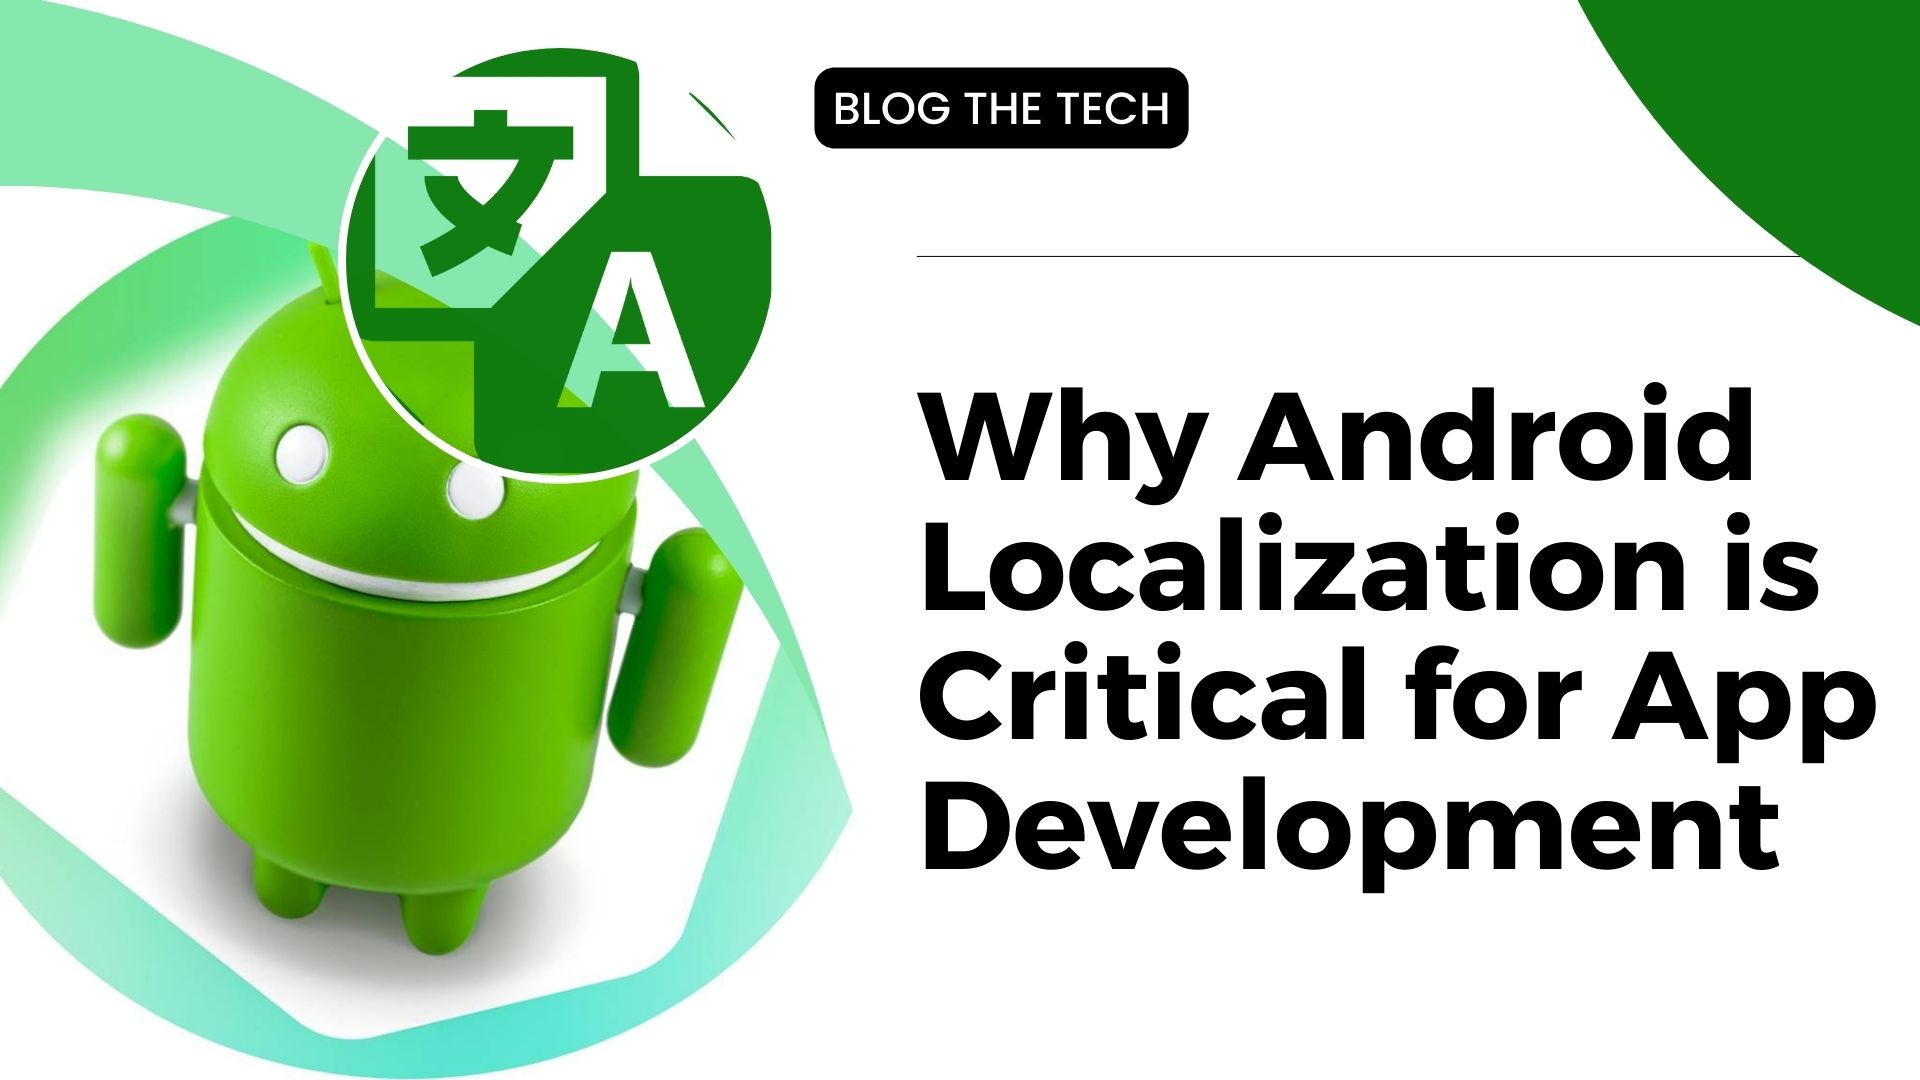 Why Android Localization is Critical for App Development